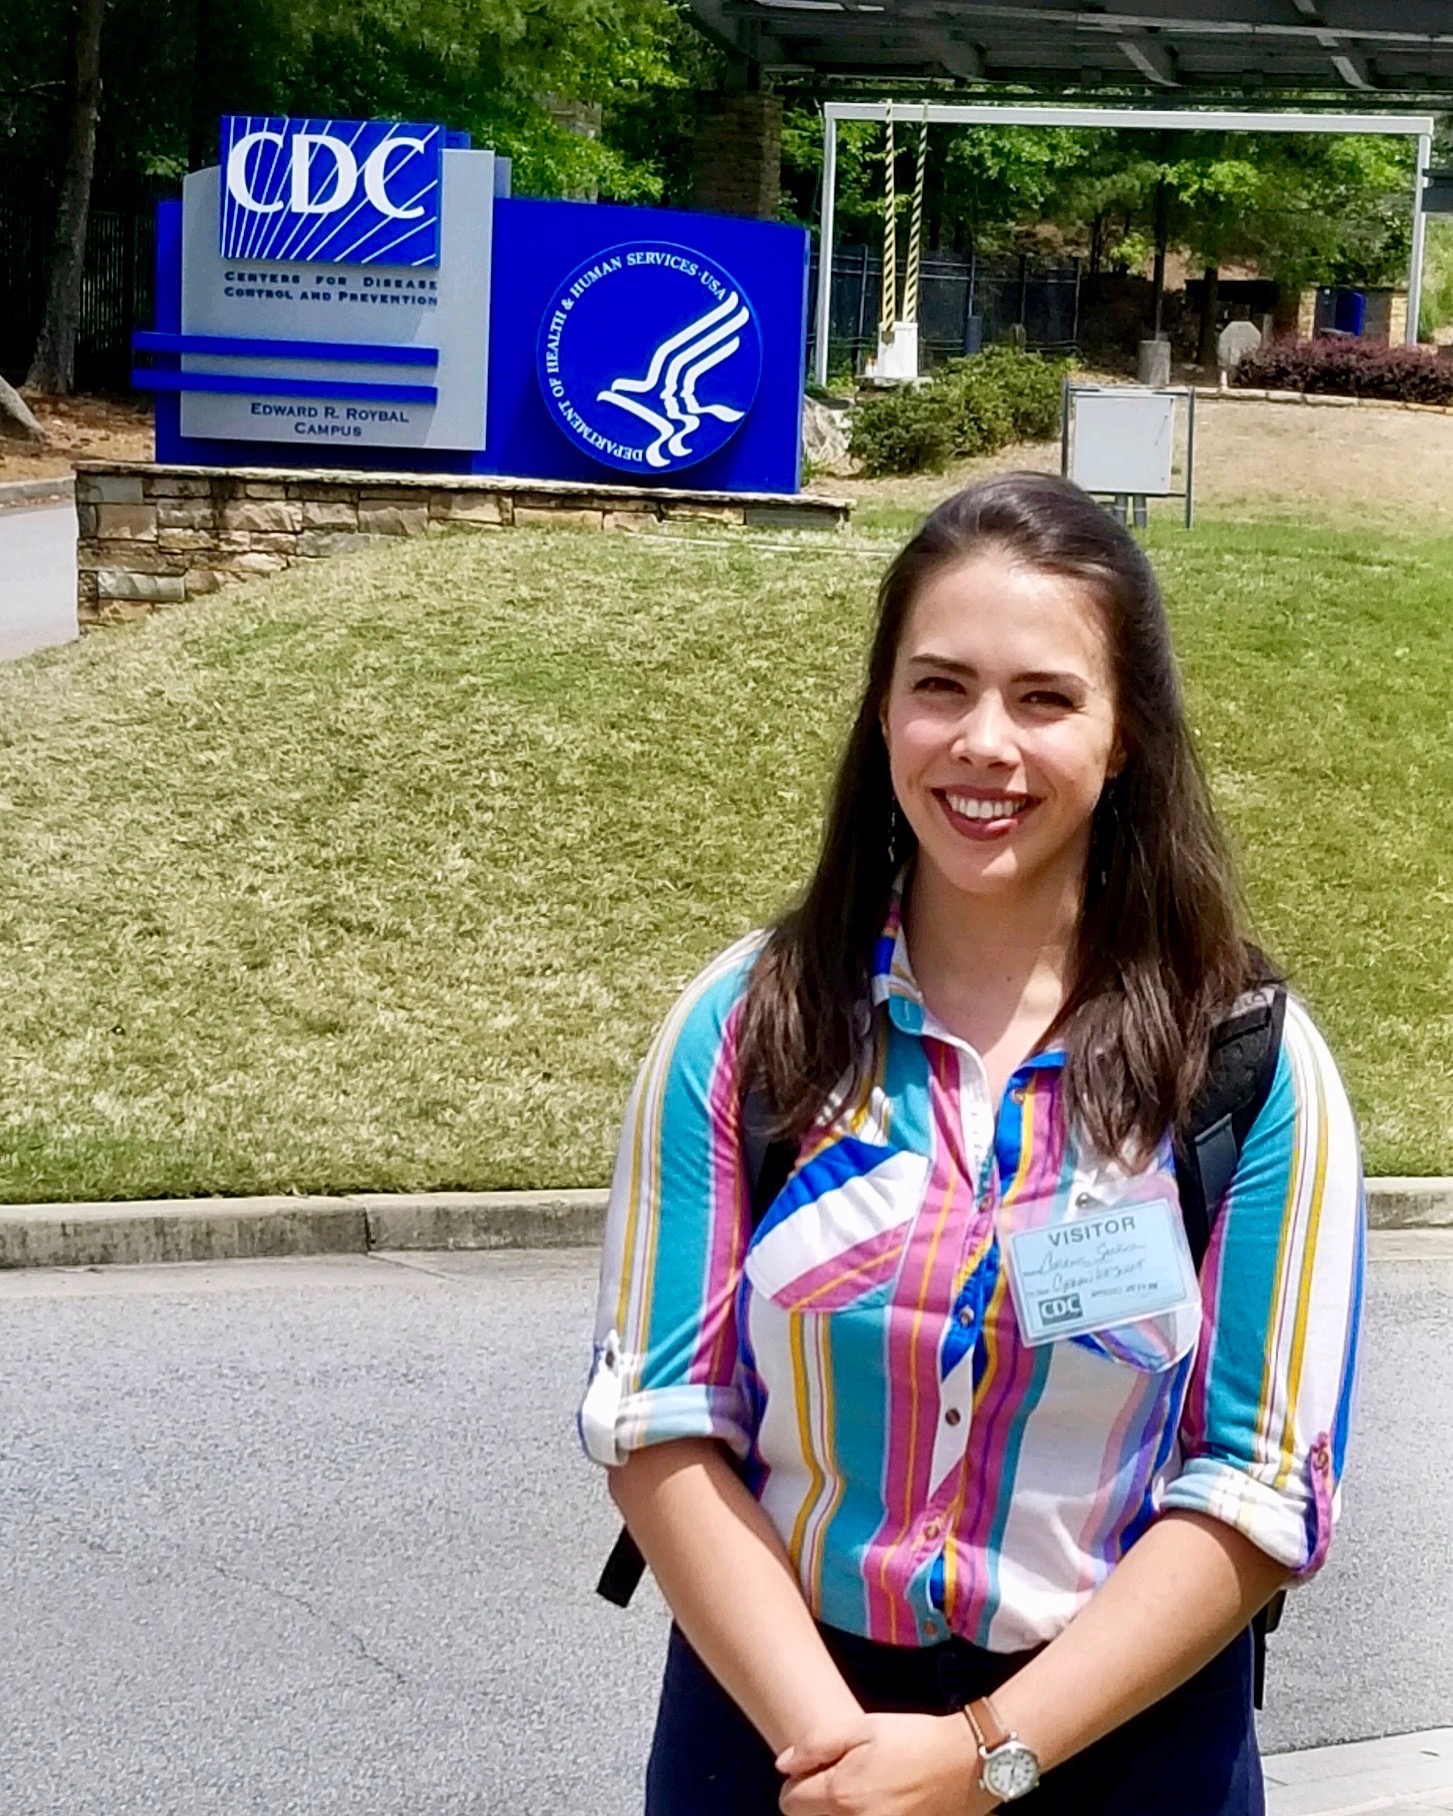 Sanger standing in front of a CDC sign